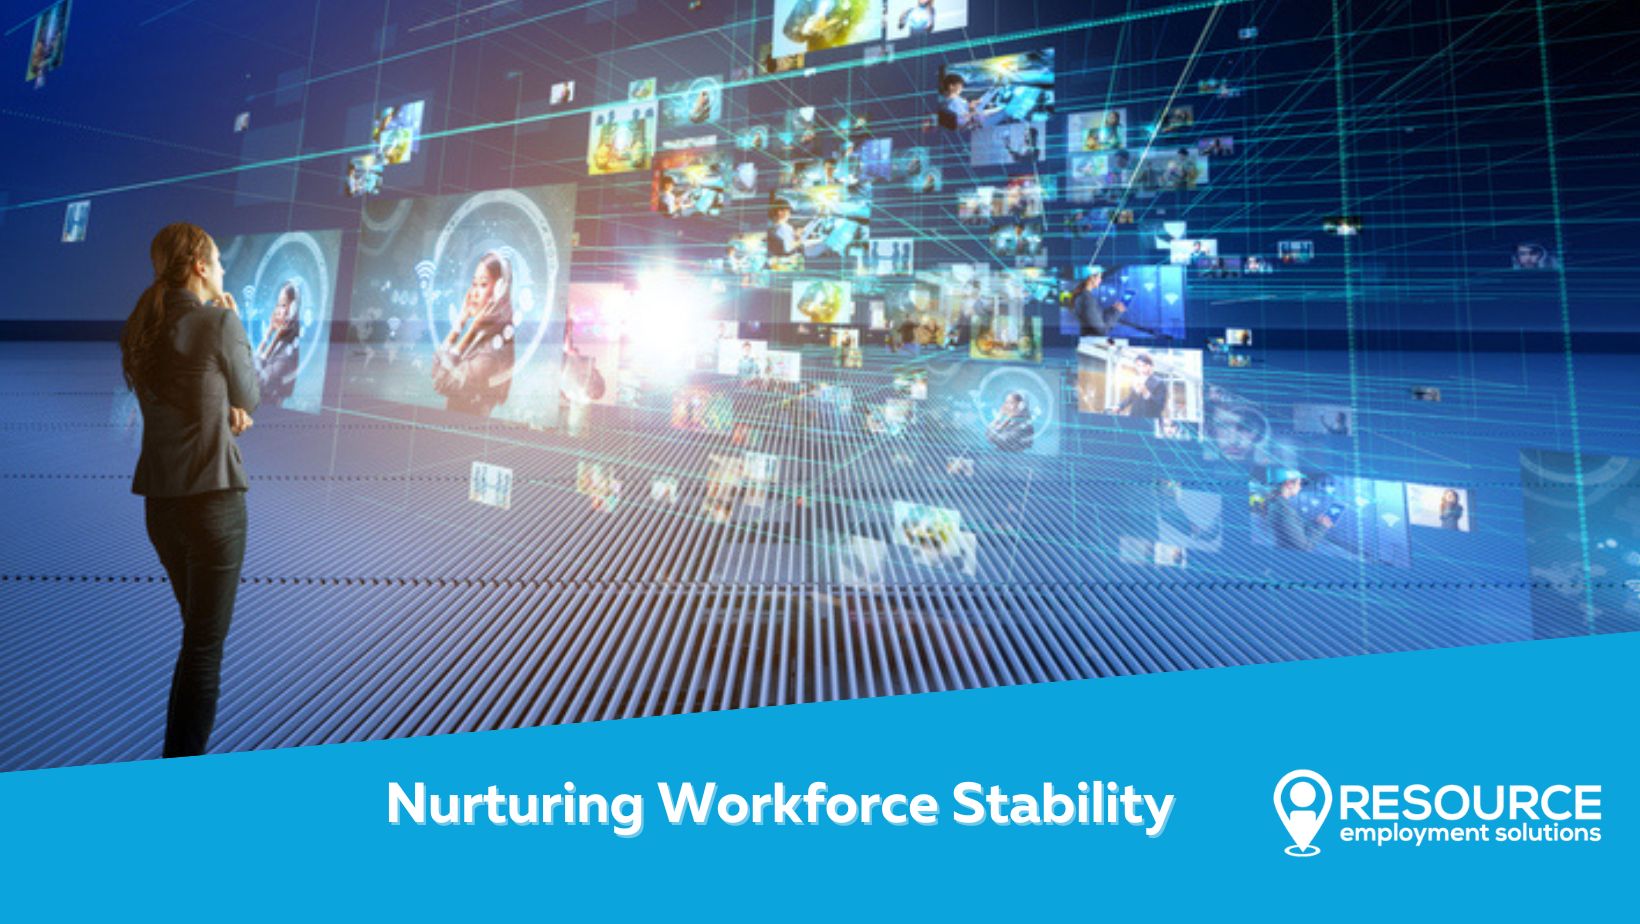 Nurturing Workforce Stability: The Crucial Role of Supply Chain Resilience